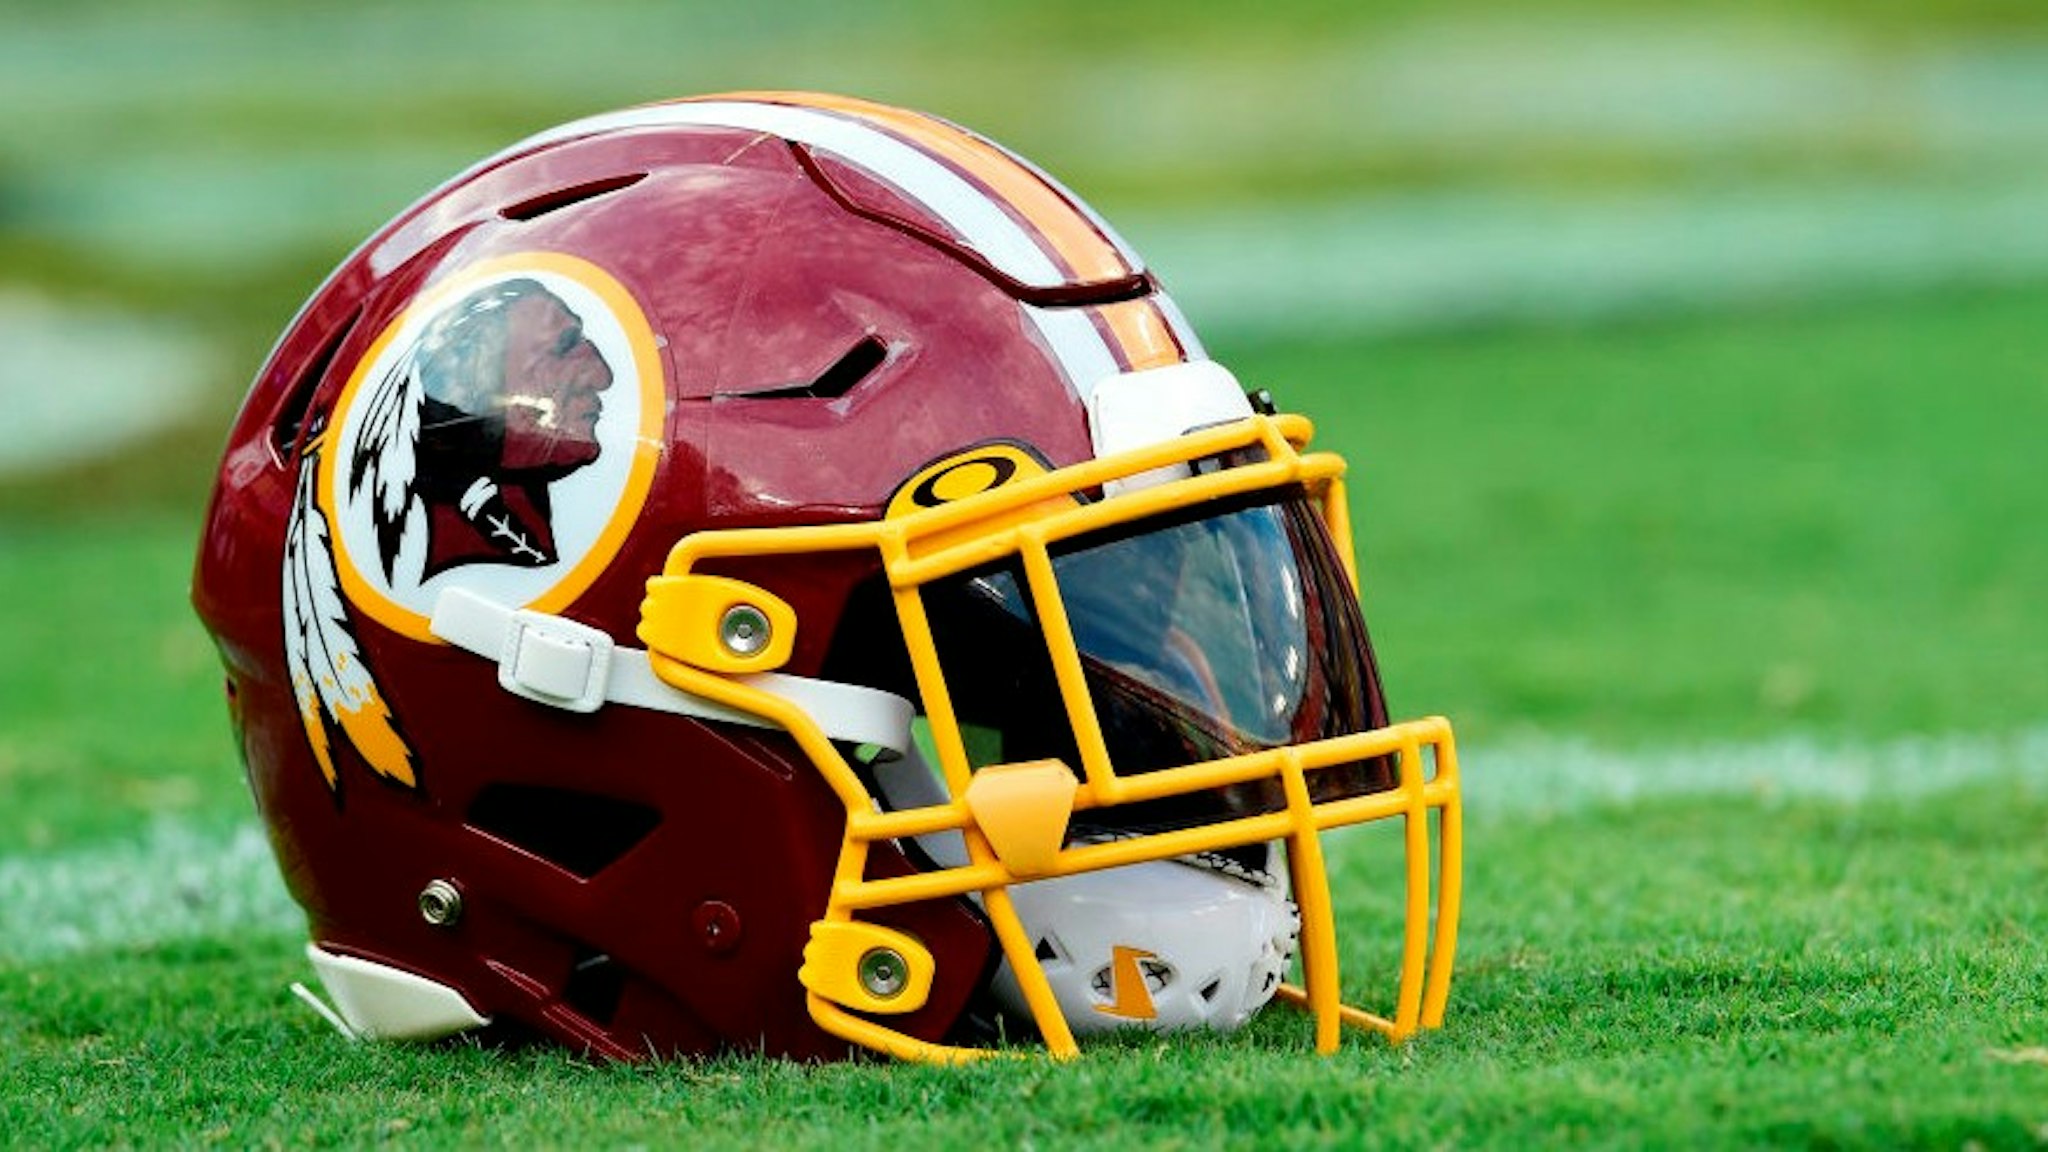 LANDOVER, MD - AUGUST 15: A Washington Redskins helmet sits on the field before a preseason game between the Cincinnati Bengals and Redskins at FedExField on August 15, 2019 in Landover, Maryland. (Photo by